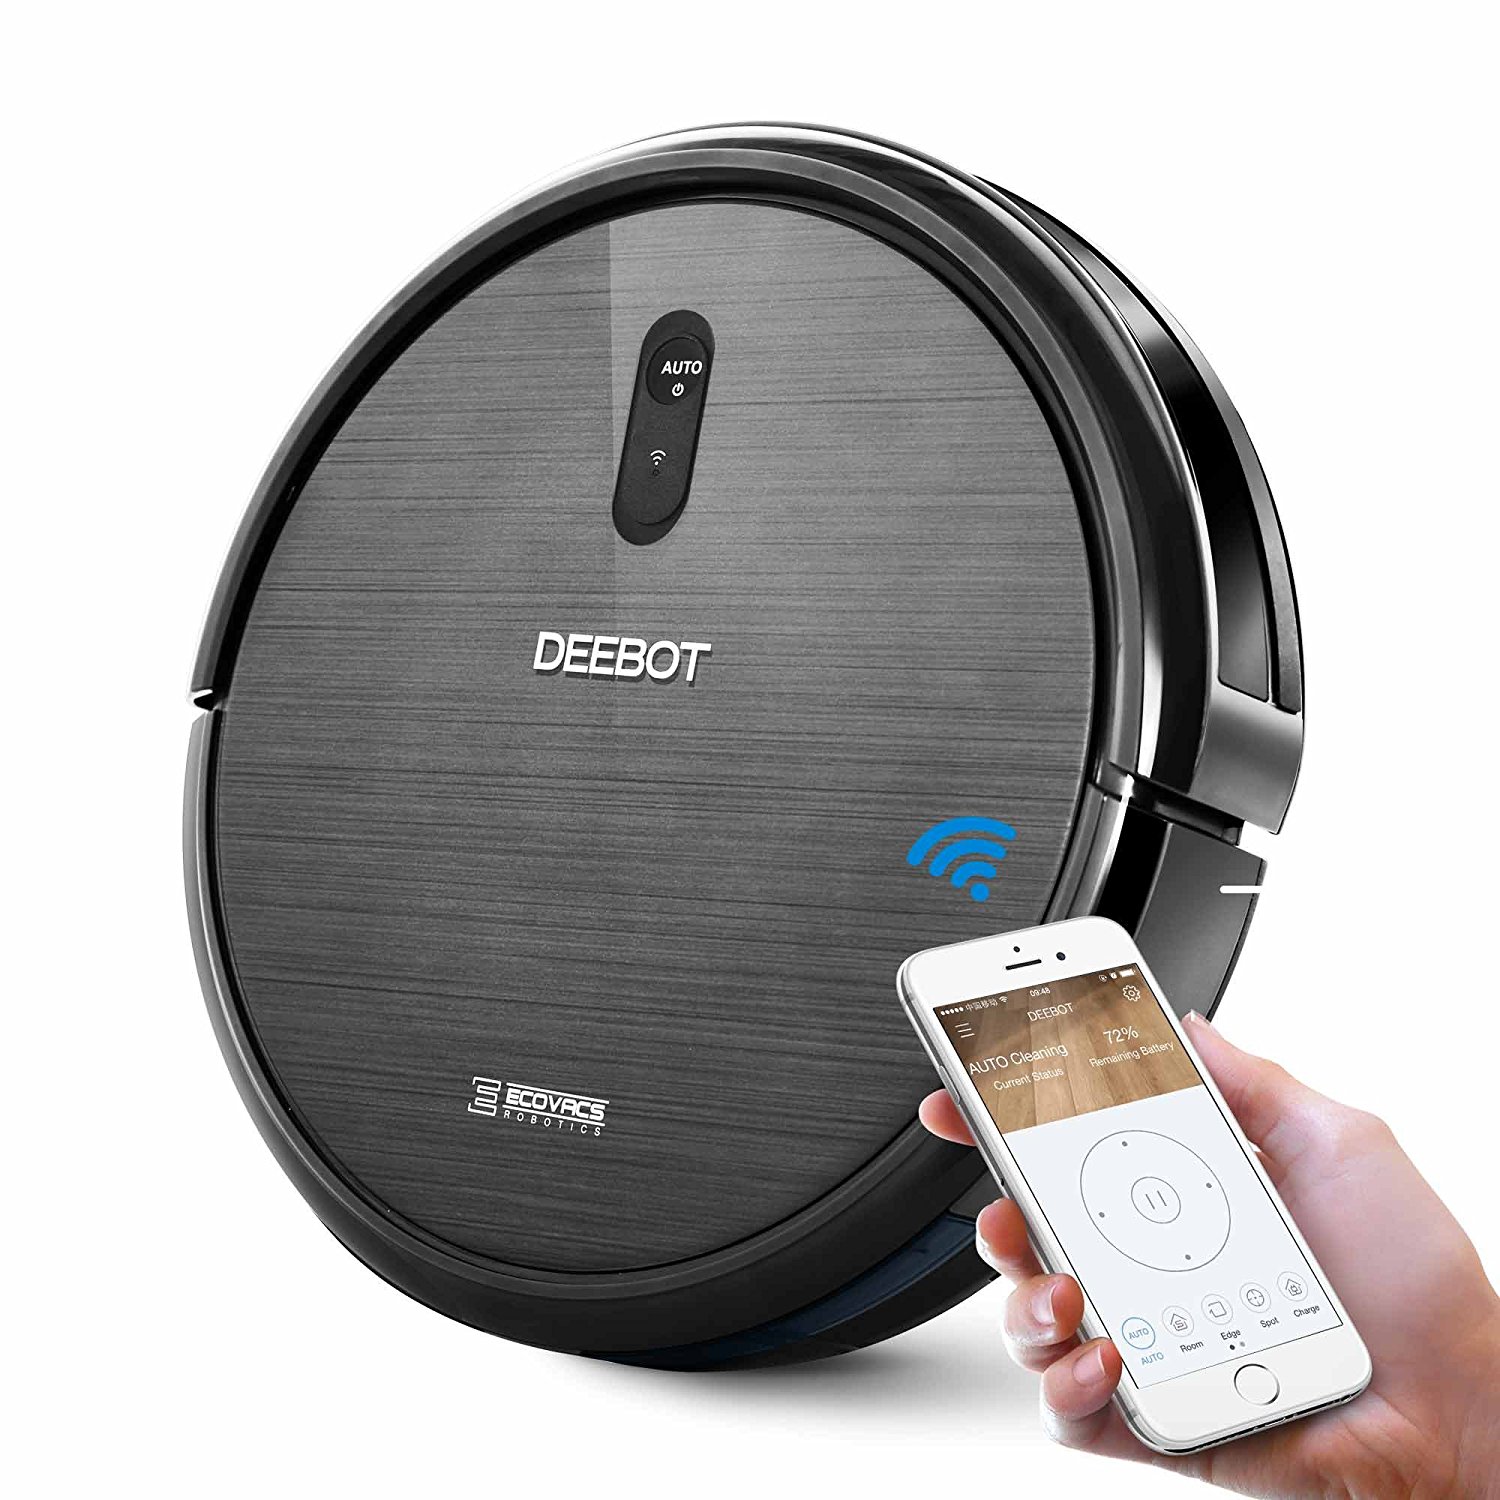 Today only: Ecovacs Deebot N79 robotic vacuum cleaner with Wi-Fi for $150